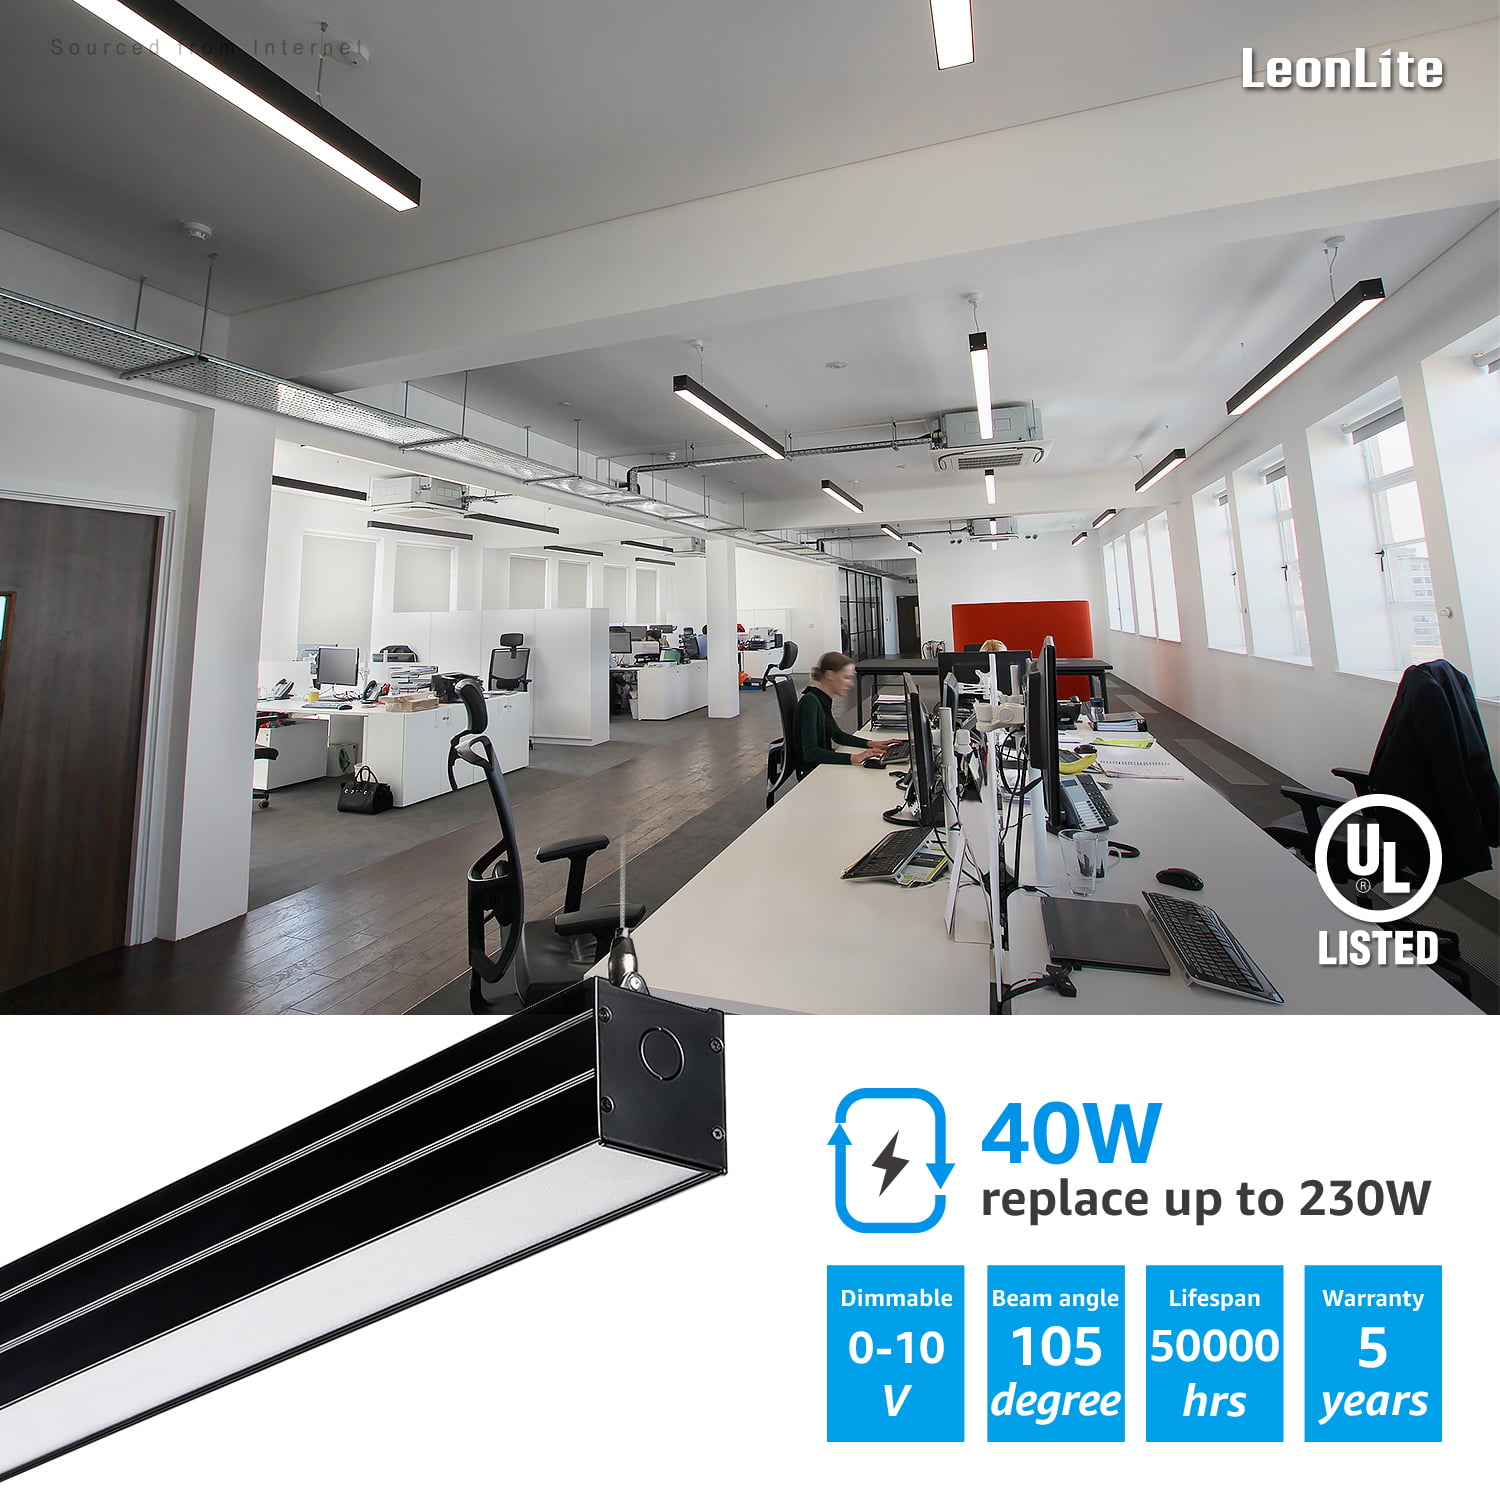 100W-230W Eq. for Office Black UL & DLC Market Garage Pack of 2 40W 4600lm Linkable Suspension Lighting Fixture LEONLITE 4ft Dimmable LED Linear Light 4000K Cool White 5 Years Warranty